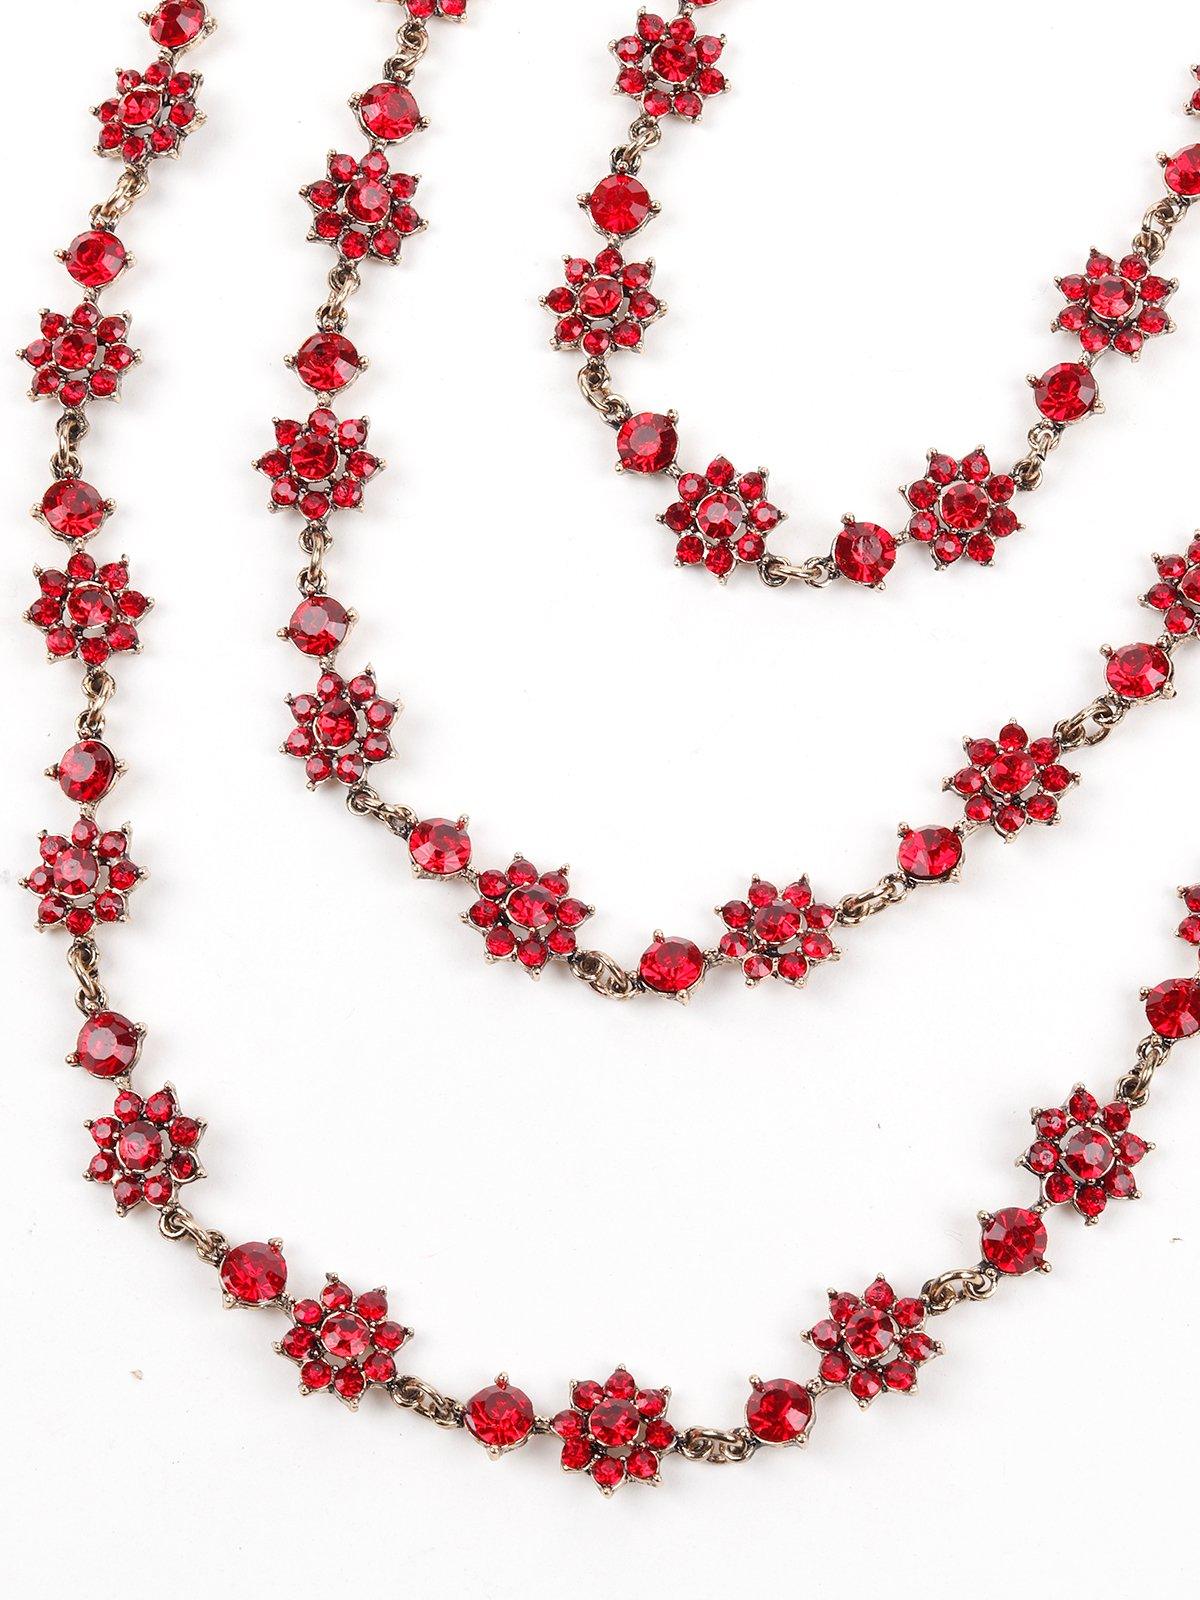 Women's Exquisite Designer 3 Layered Necklace With Crystal. - Red - Odette